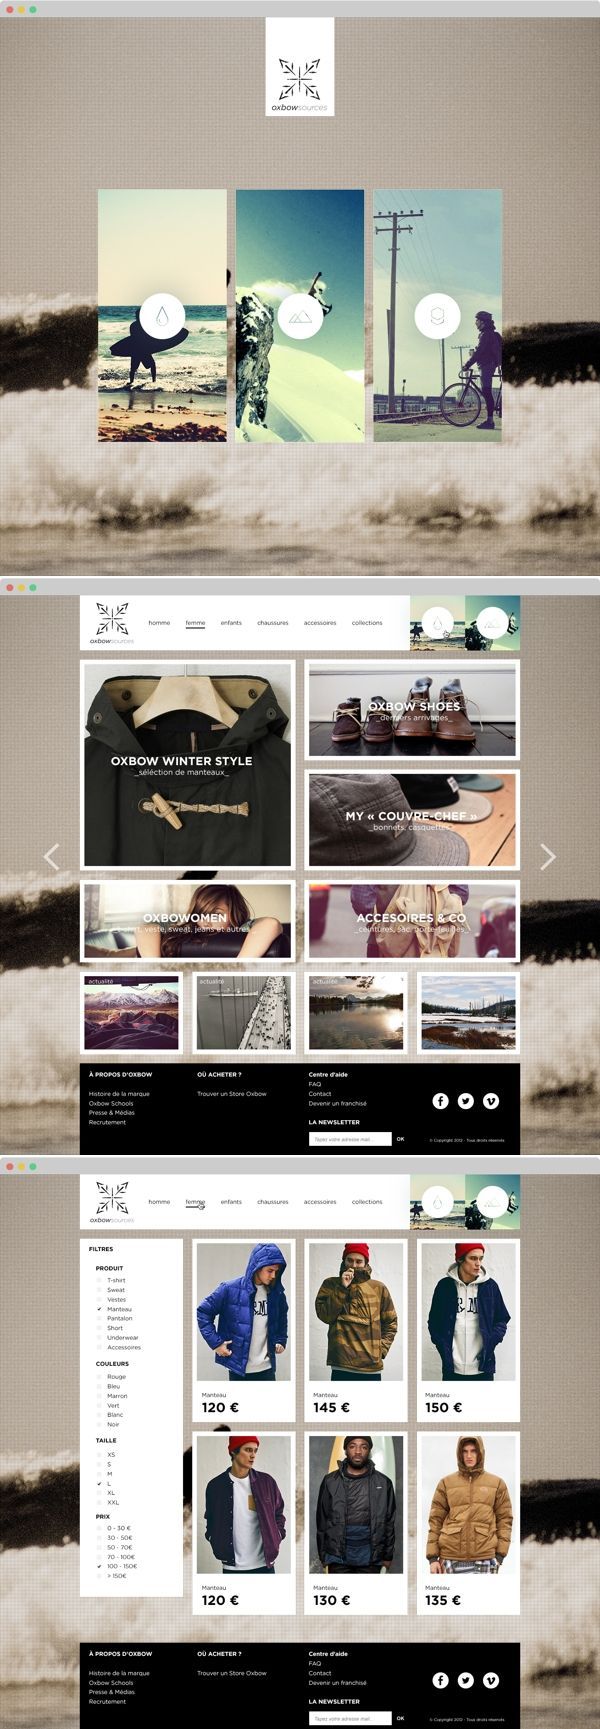 OXBOW : SOURCES | Webdesign / e-Commerce - created via pinthemall.net